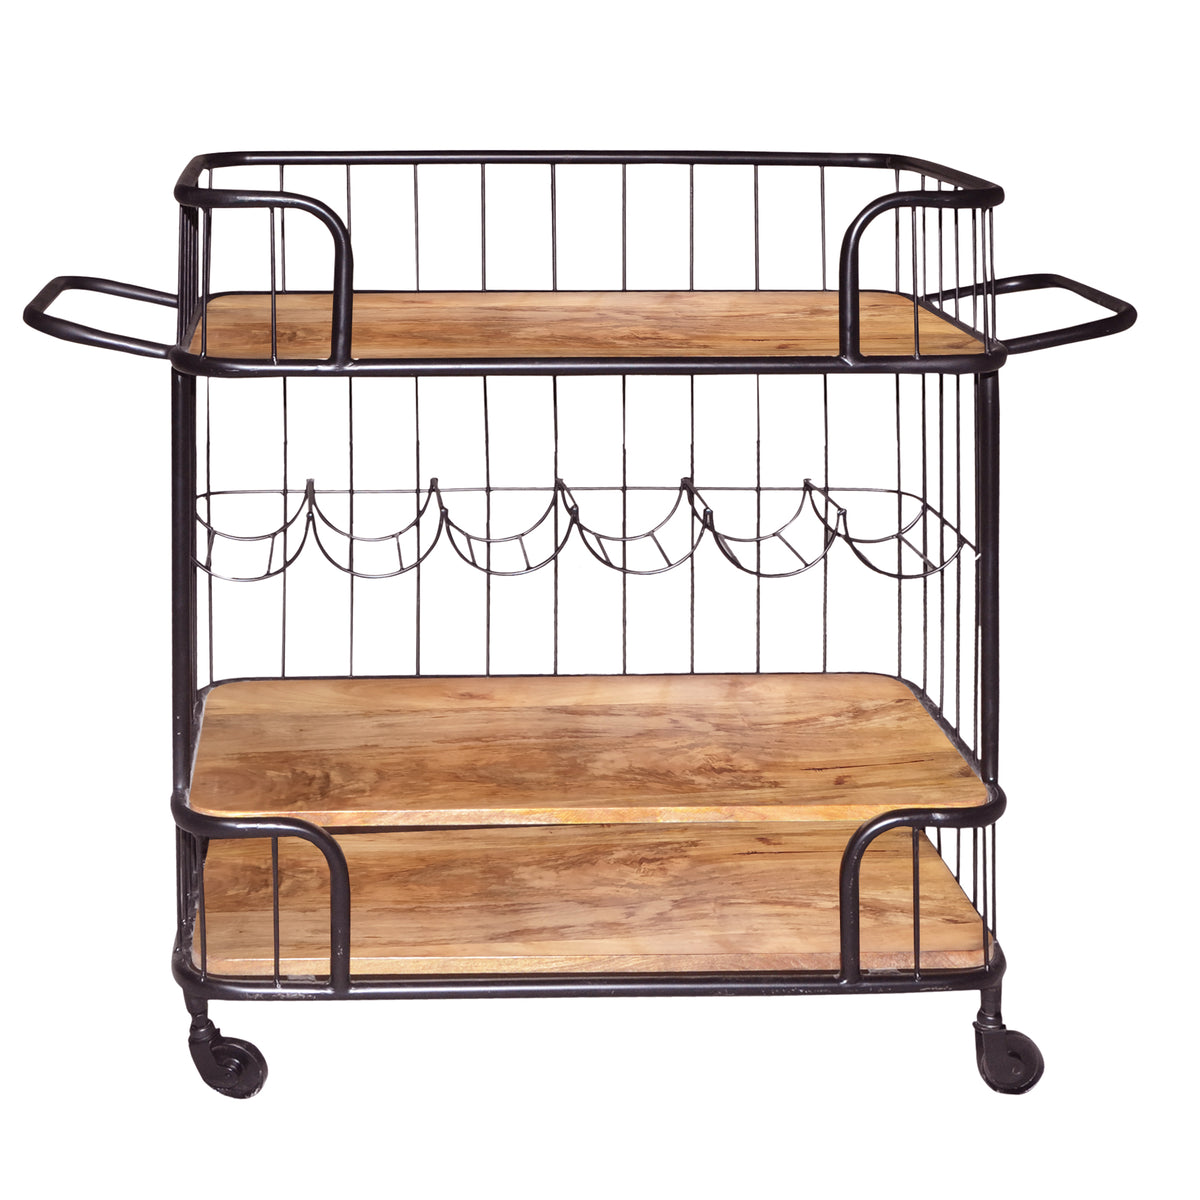 Metal Frame Bar Cart with Wooden Top and 2 Shelves, Black and Brown - UPT-197314